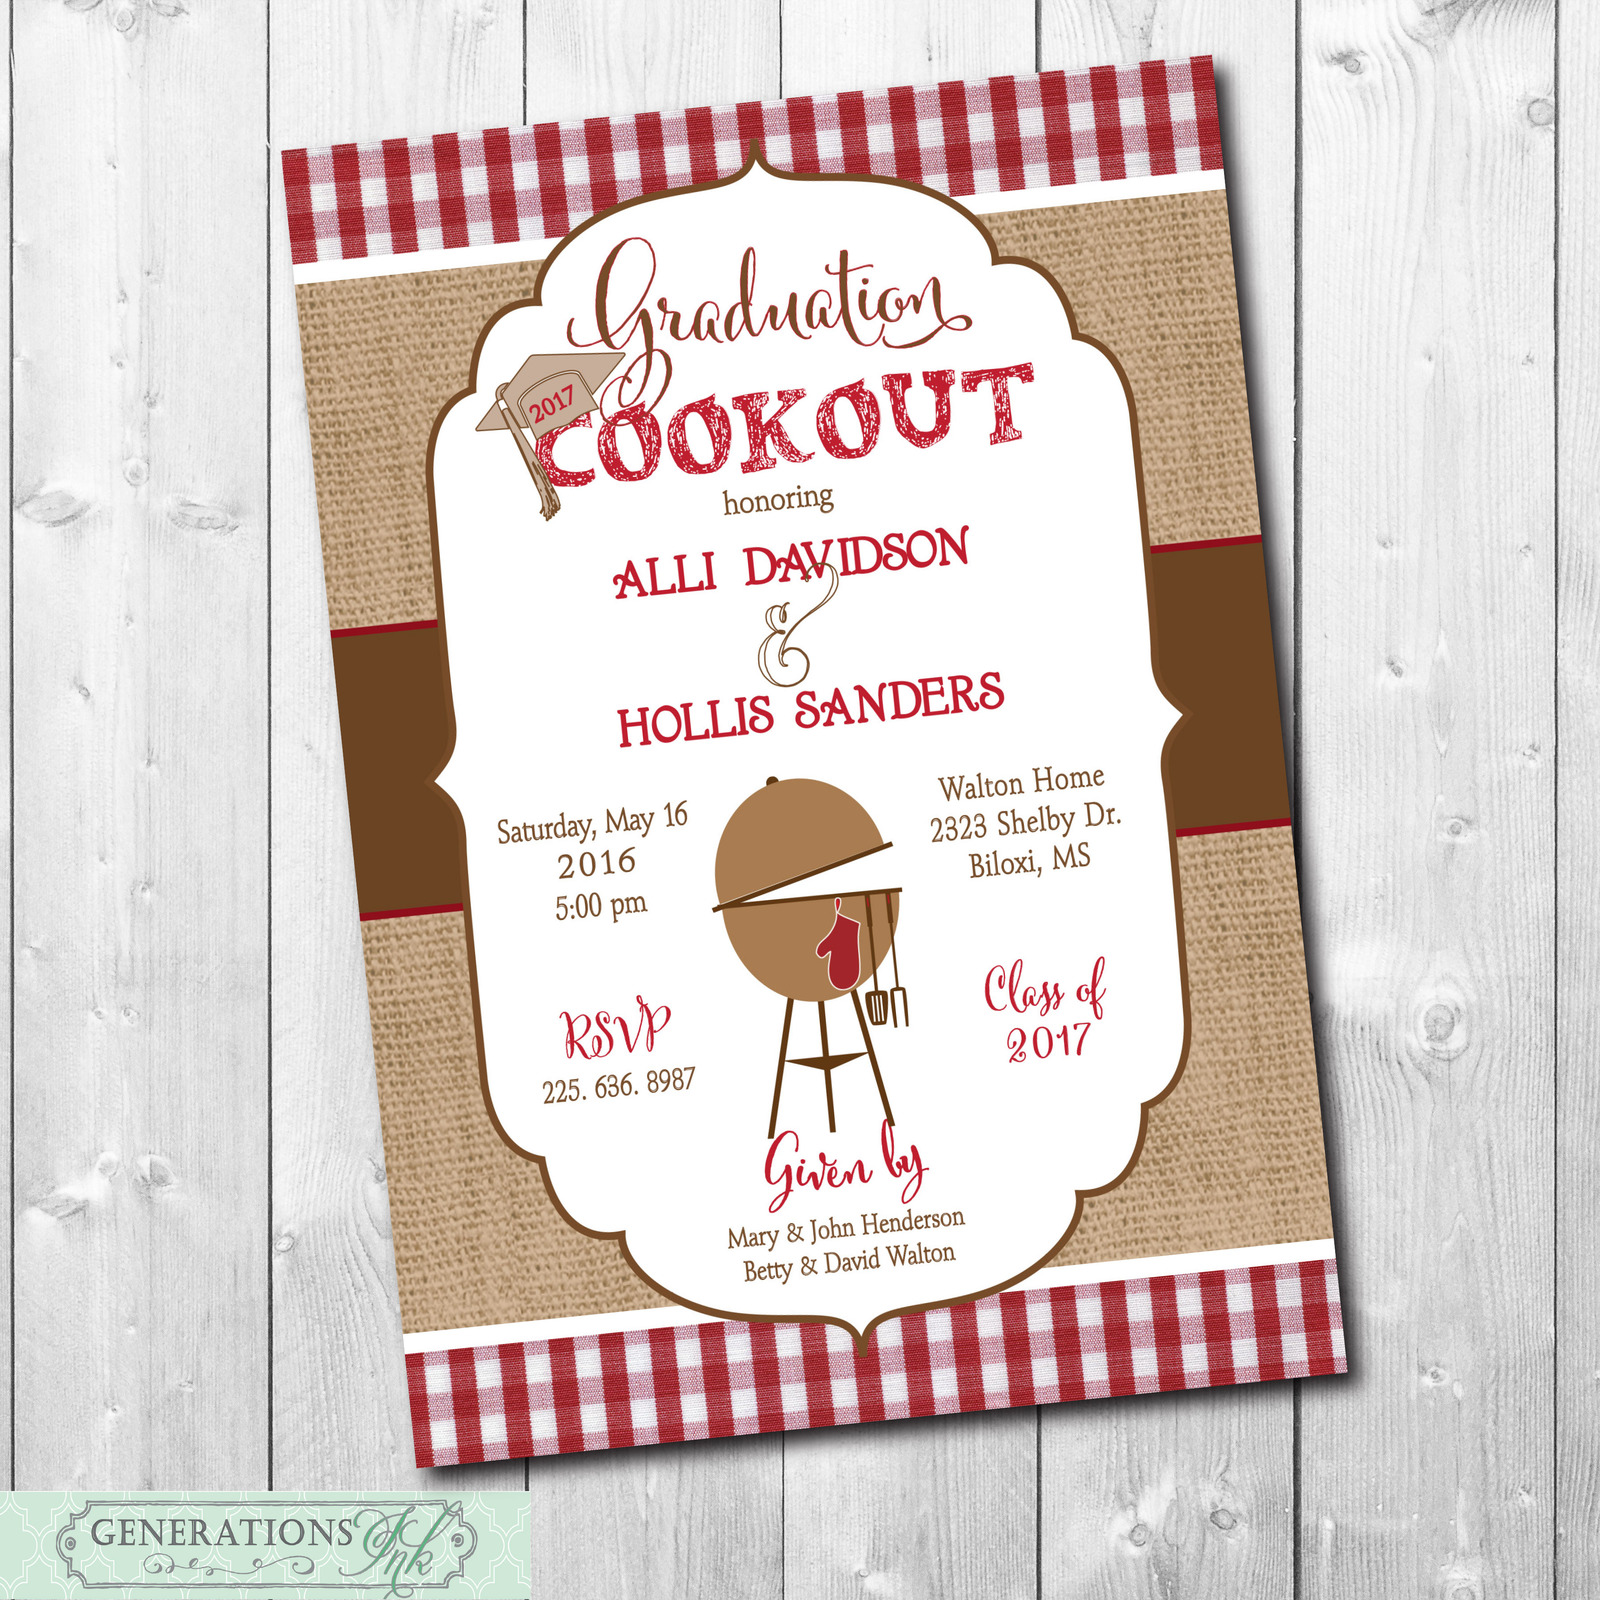 Primary image for Graduation Party Cookout BBQ Invitation/printable/Digital File/DIY